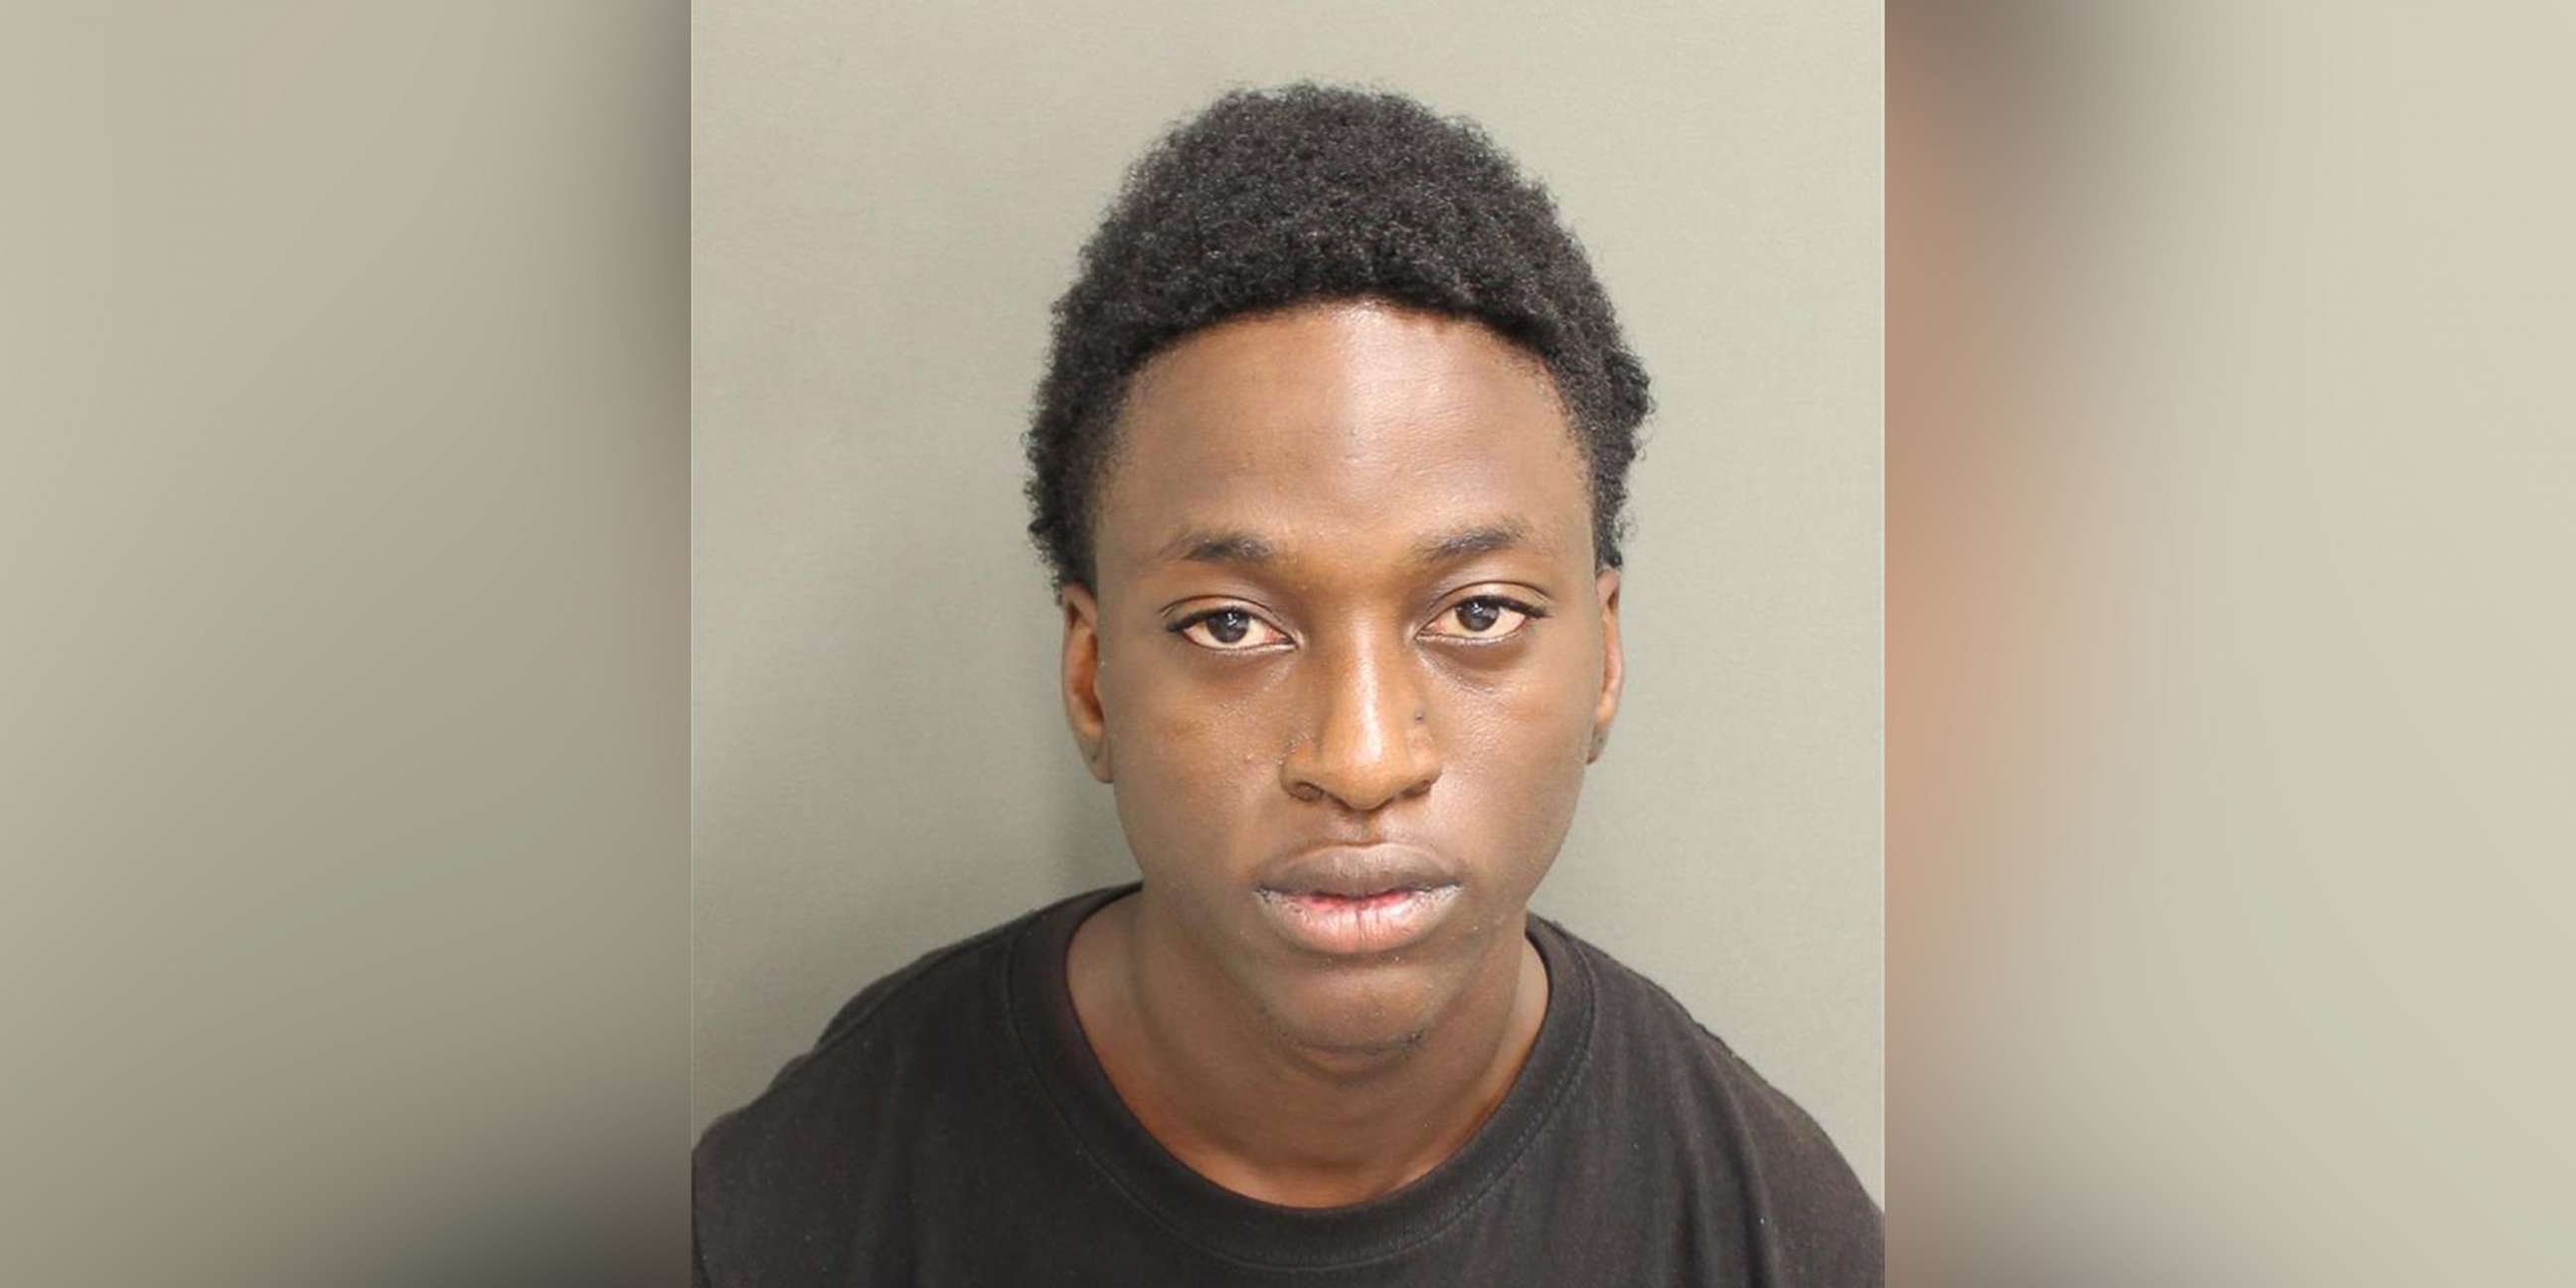 PHOTO: Christopher Stephan Lewis, 19, of Florida was arrested and charged with Battery on a law enforcement officer and first-degree attempted murder, his jail records show.